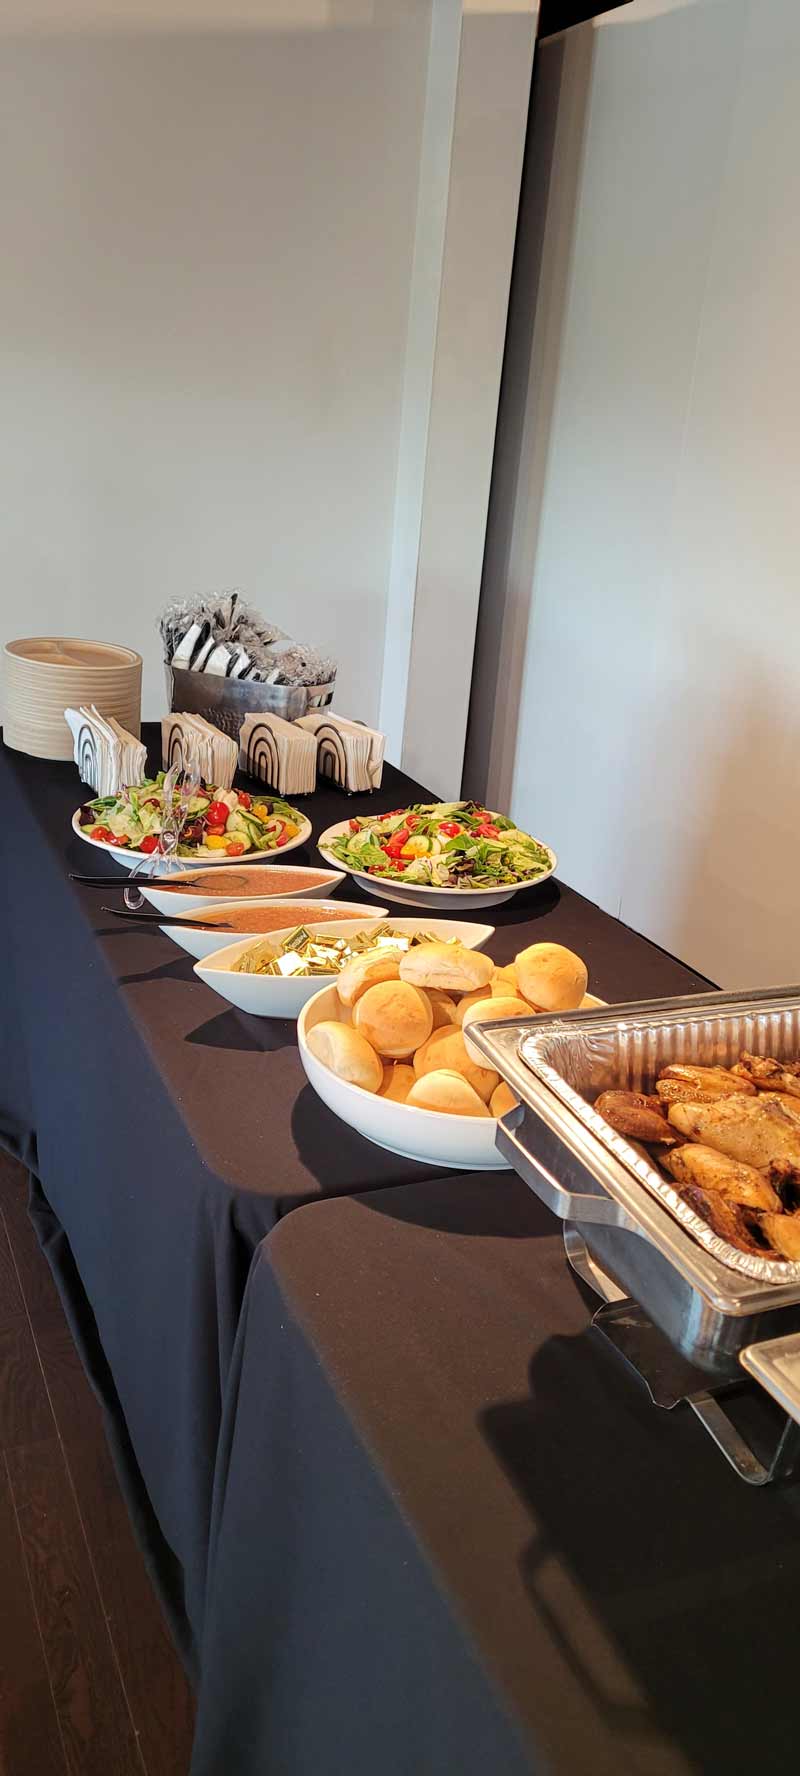 Salads, rolls and side from BBQ Brother catering.